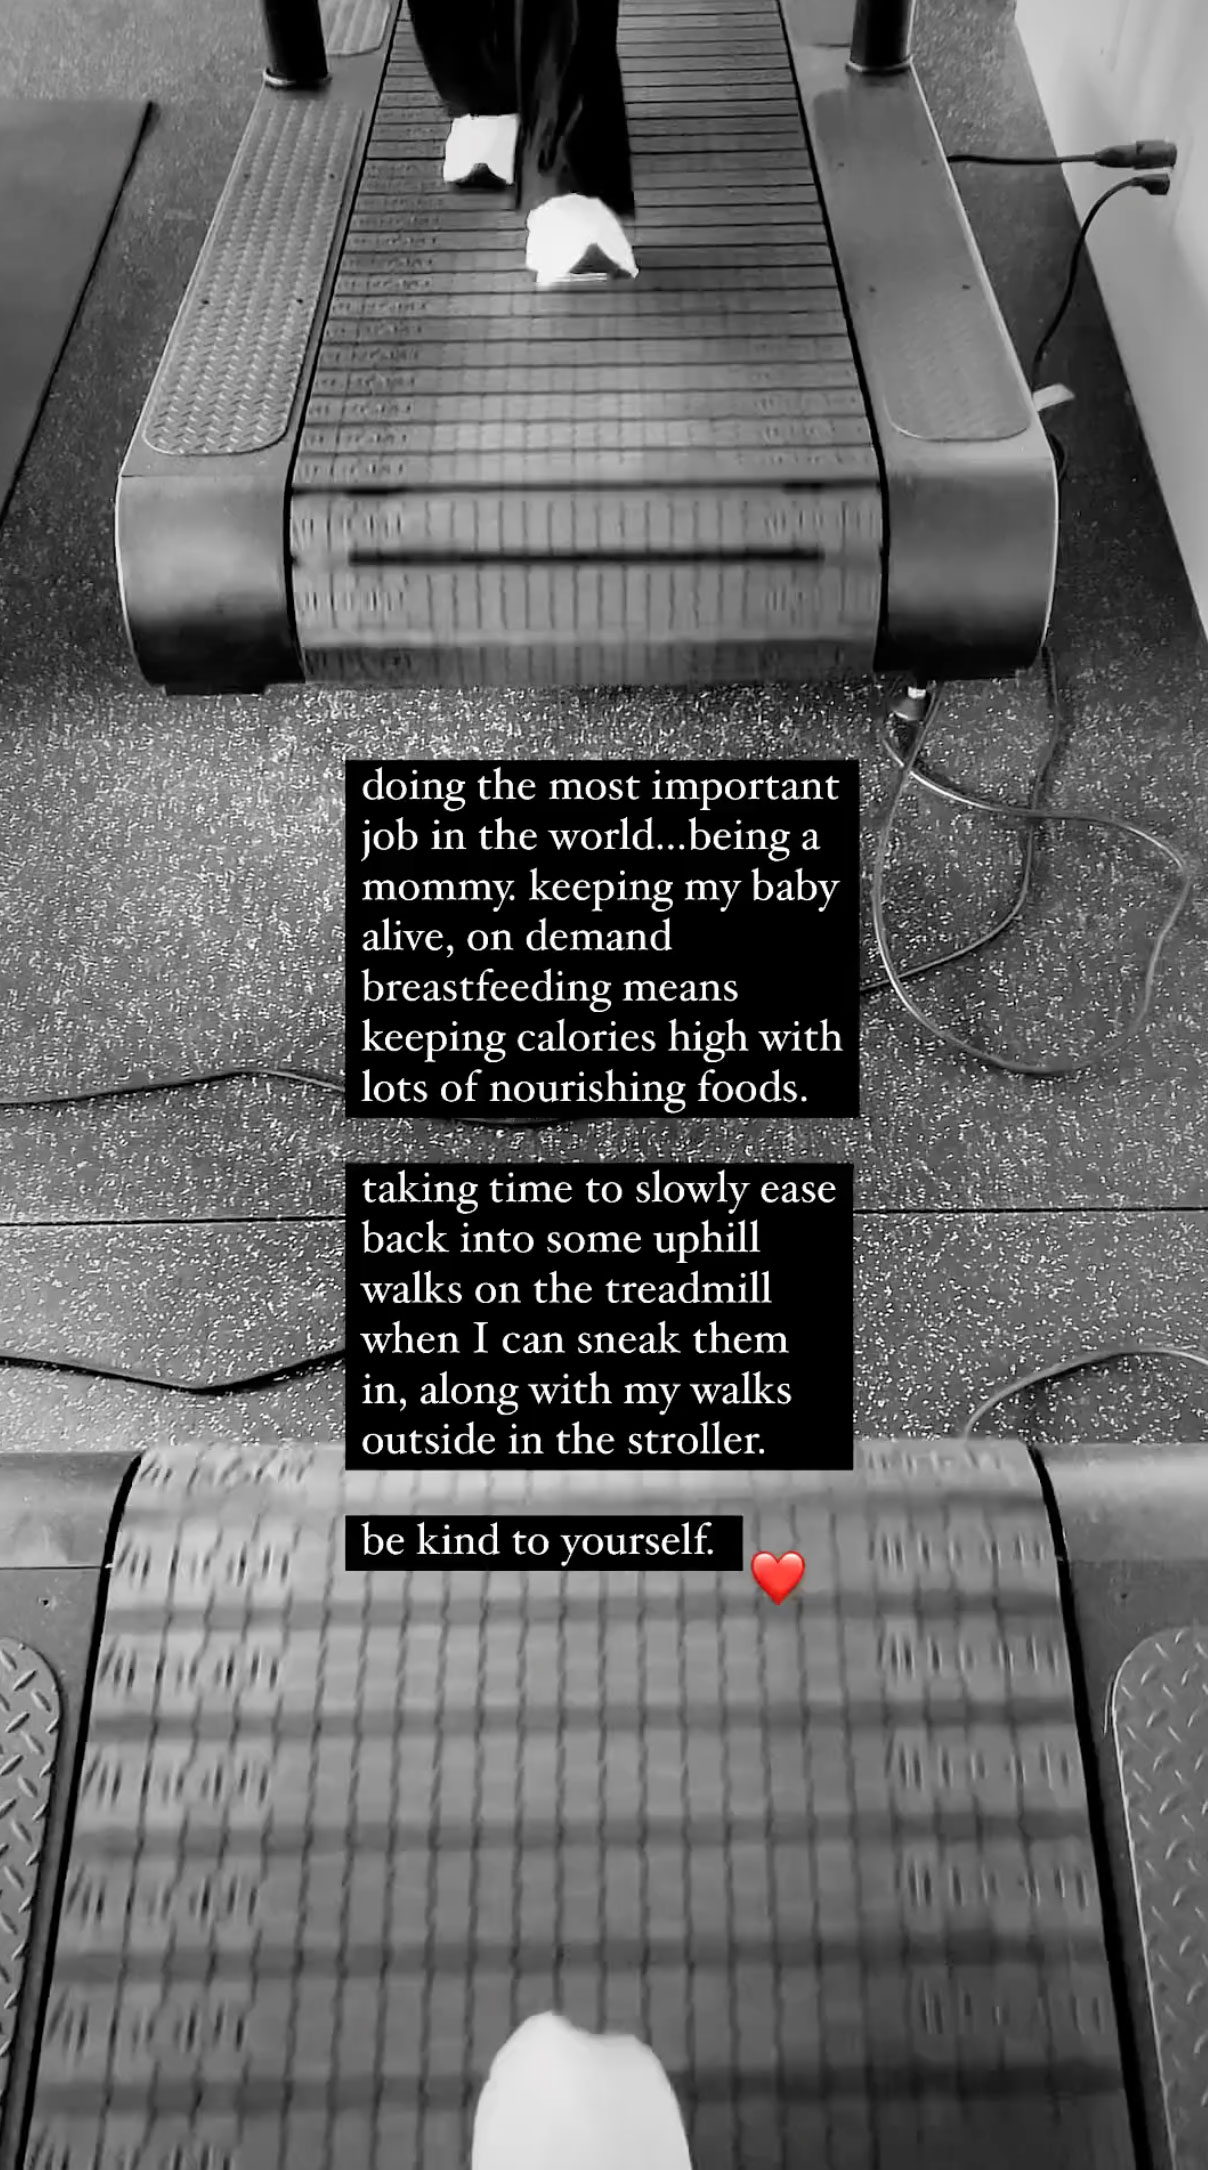 Kourtney shared a video of herself walking on the treadmill